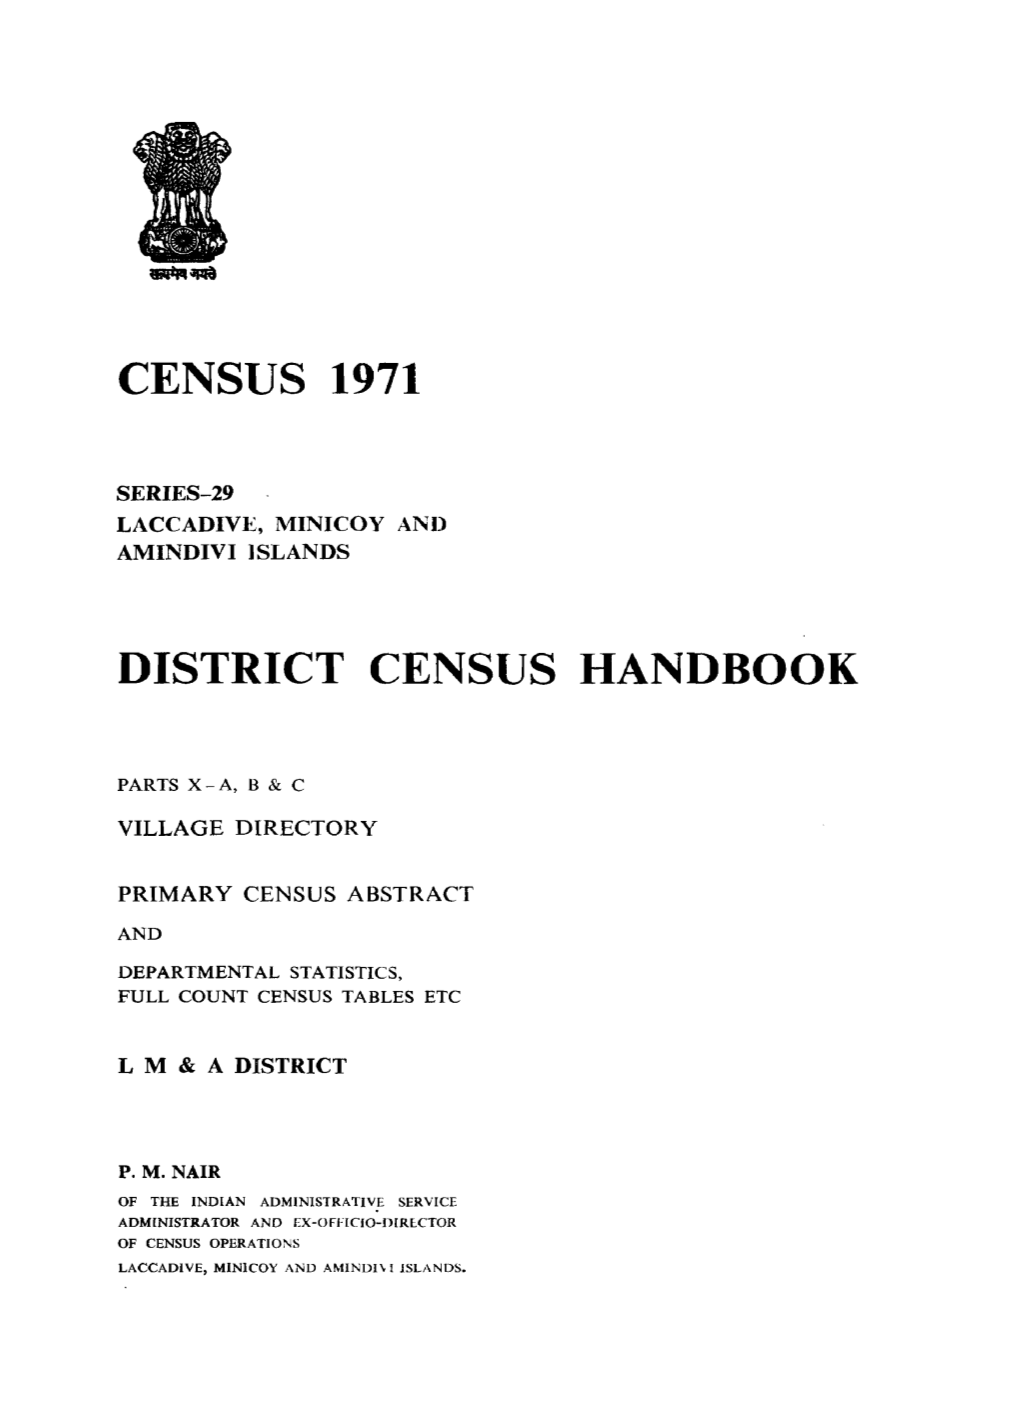 Village Directory, Primary Census Abstrct, Departmental Statistics, Full Count Census Tables Part X-A, B & C, Series-29